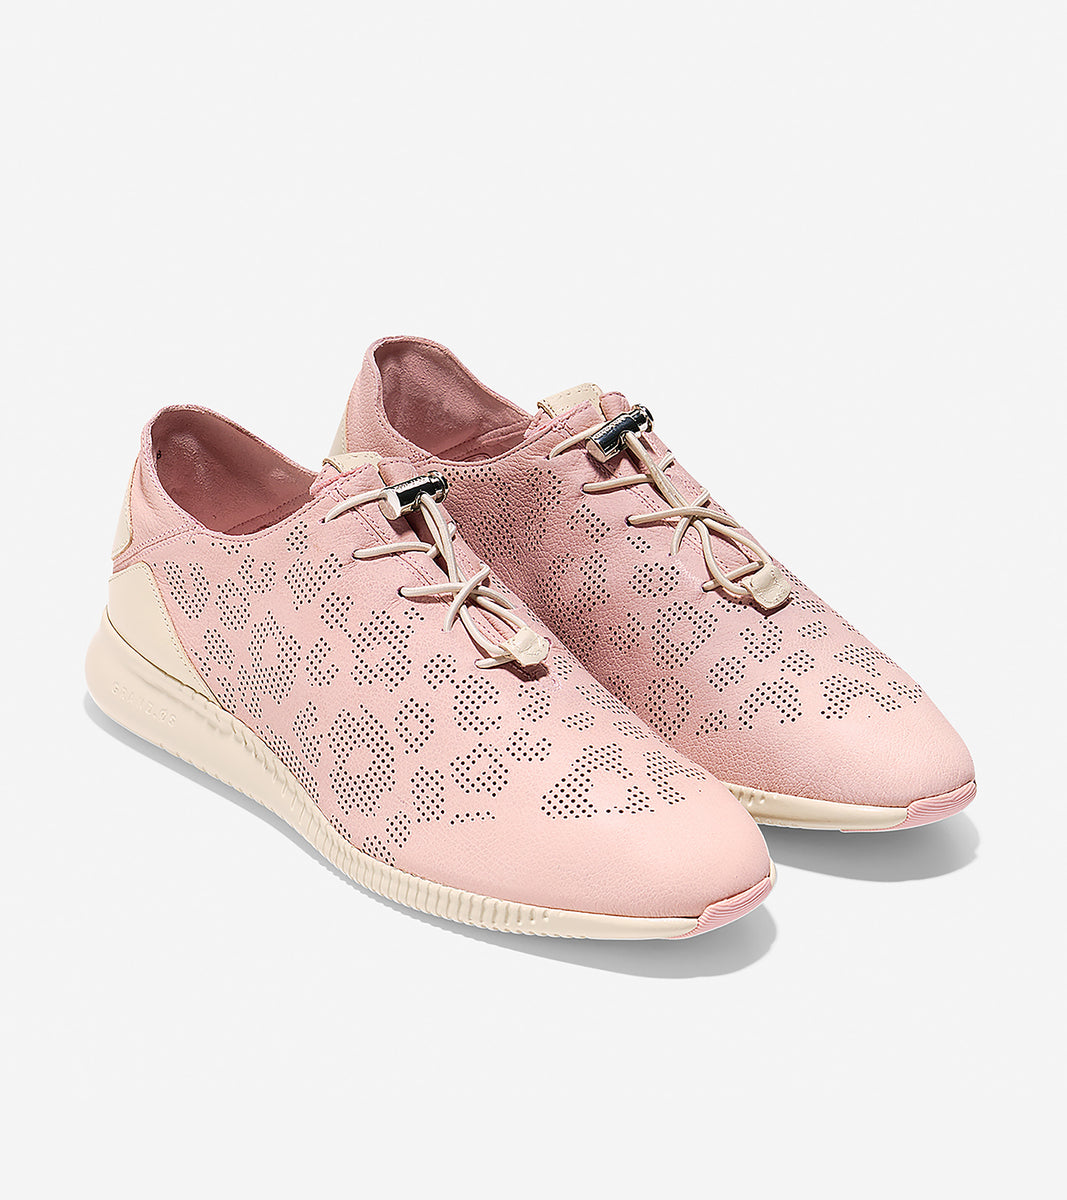 ColeHaan-StudiøGrand Pack-and-Go Sneaker-w06817-Silver Pink Perforated Ocelot Print Nubuck